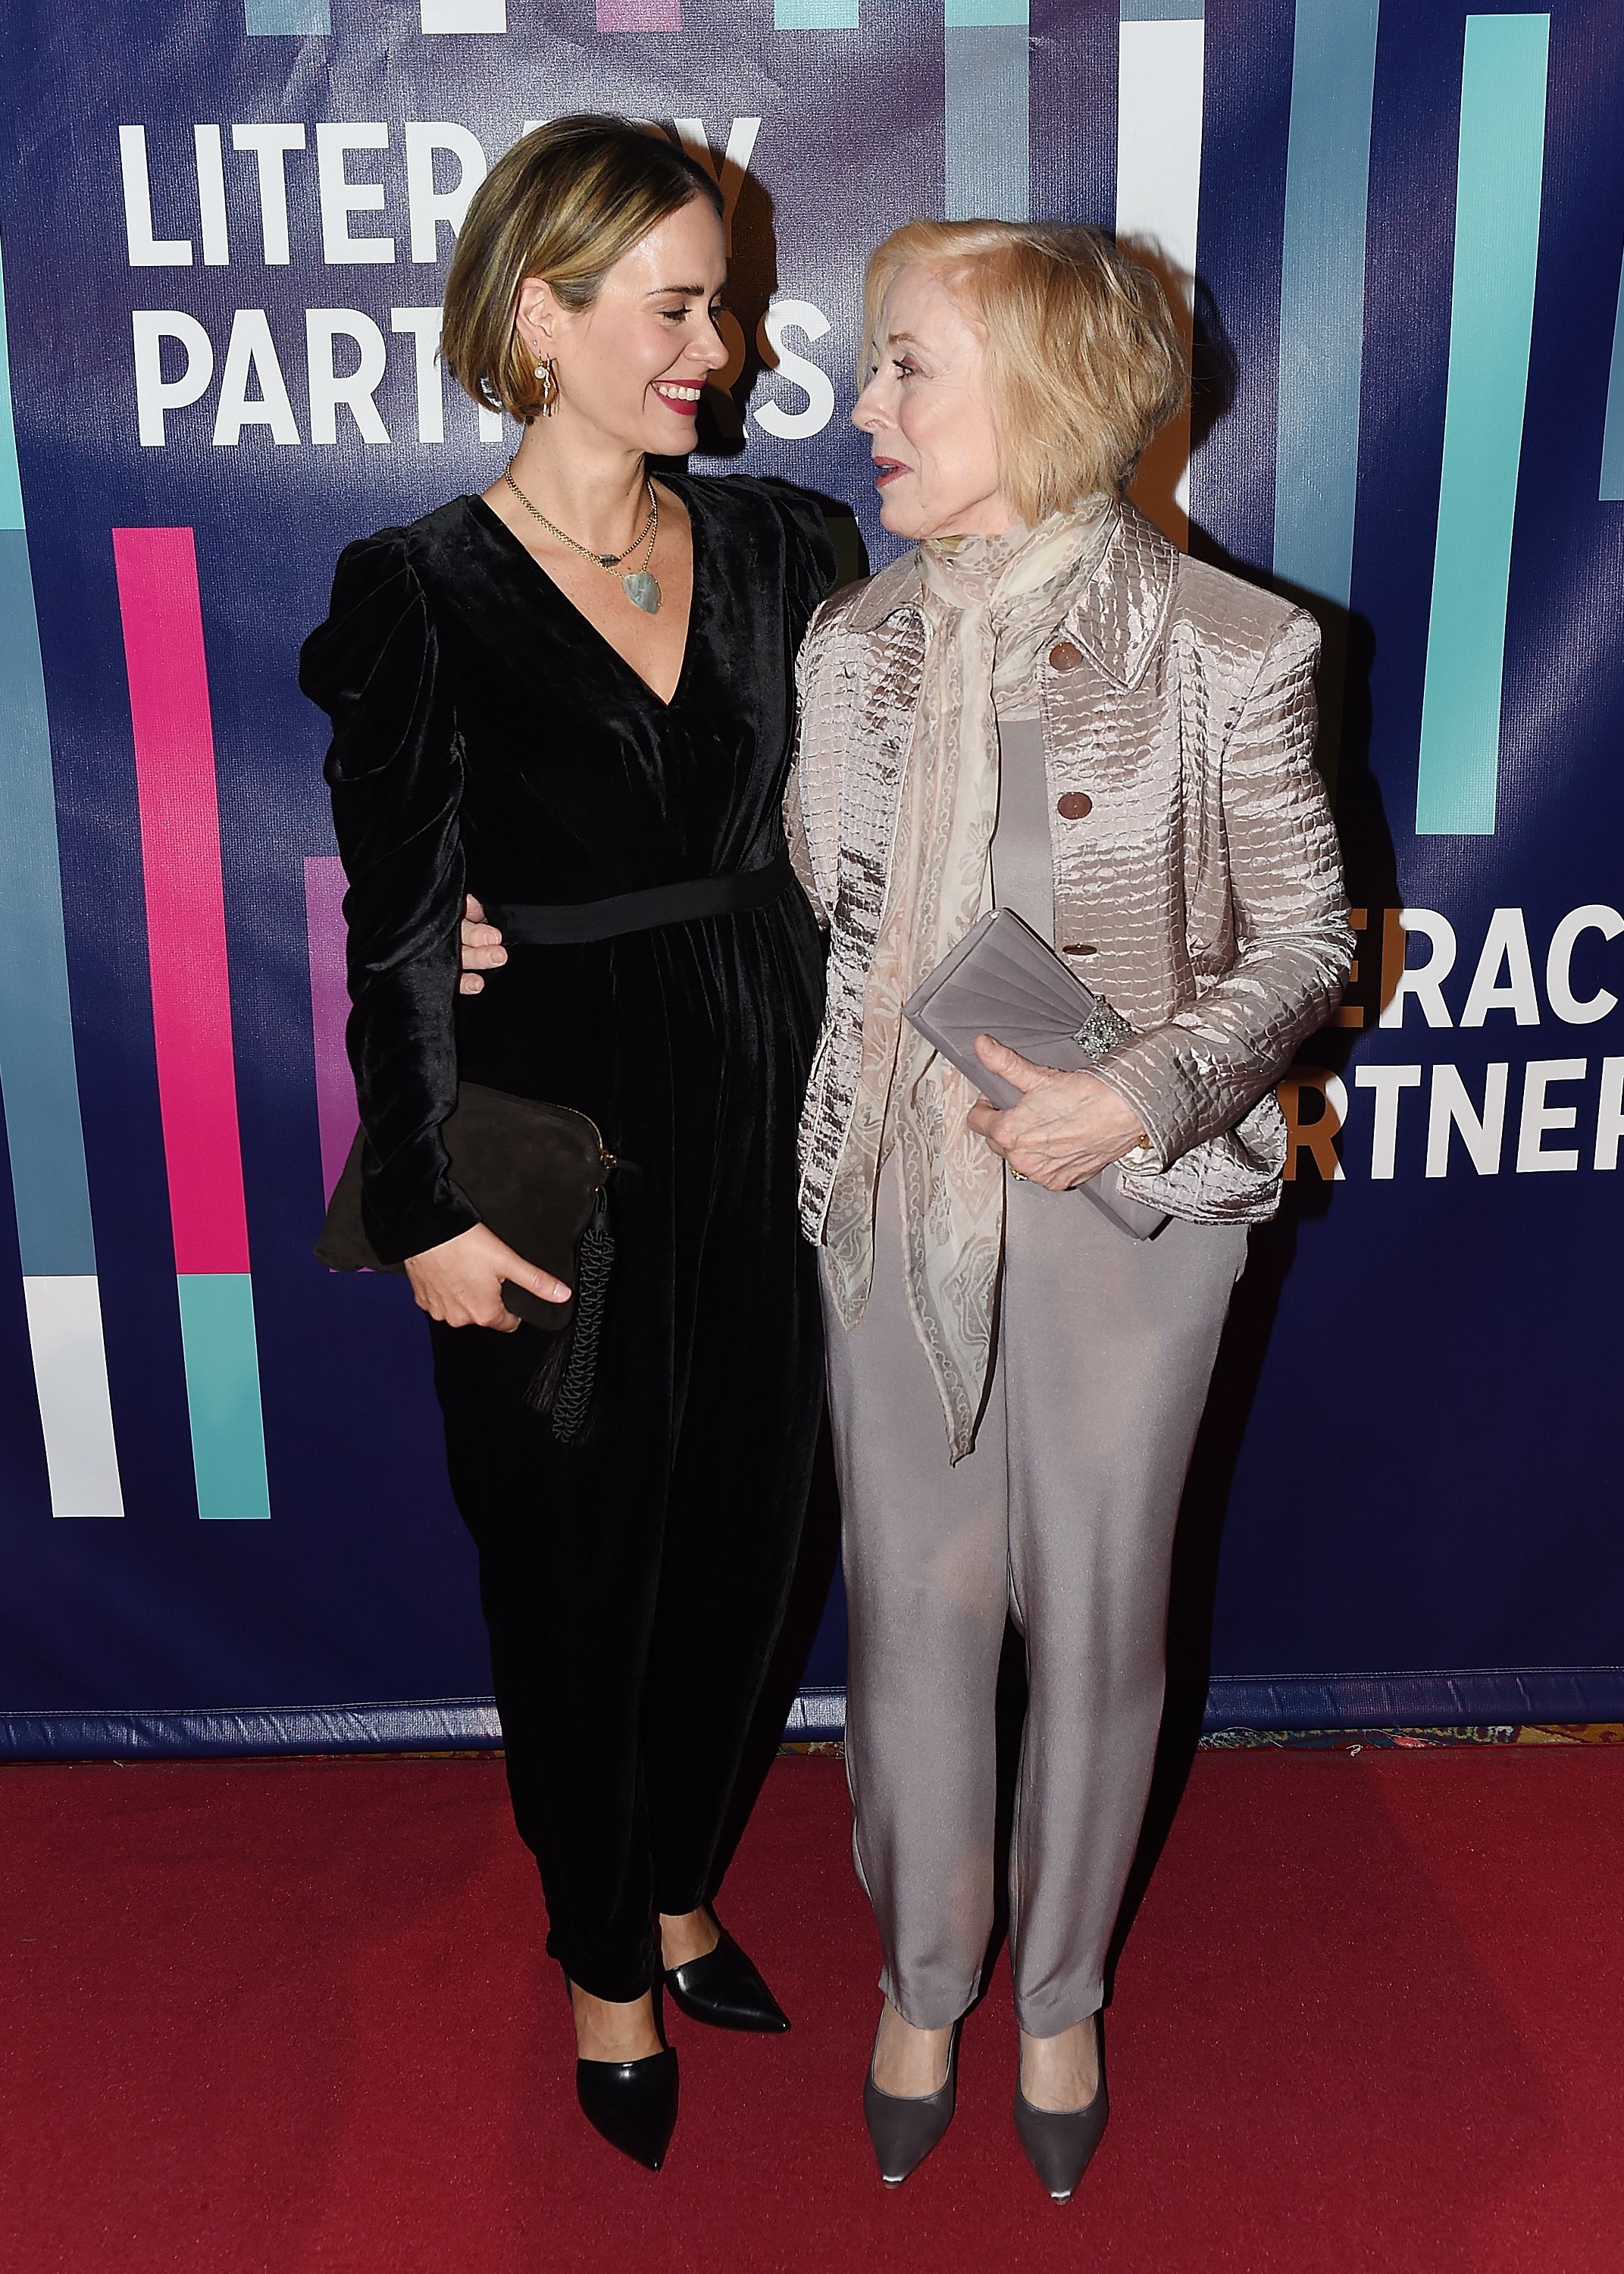 Sarah Paulson Has Been Dating Holland Taylor for 4 Years Here's a Look at Their Relationship